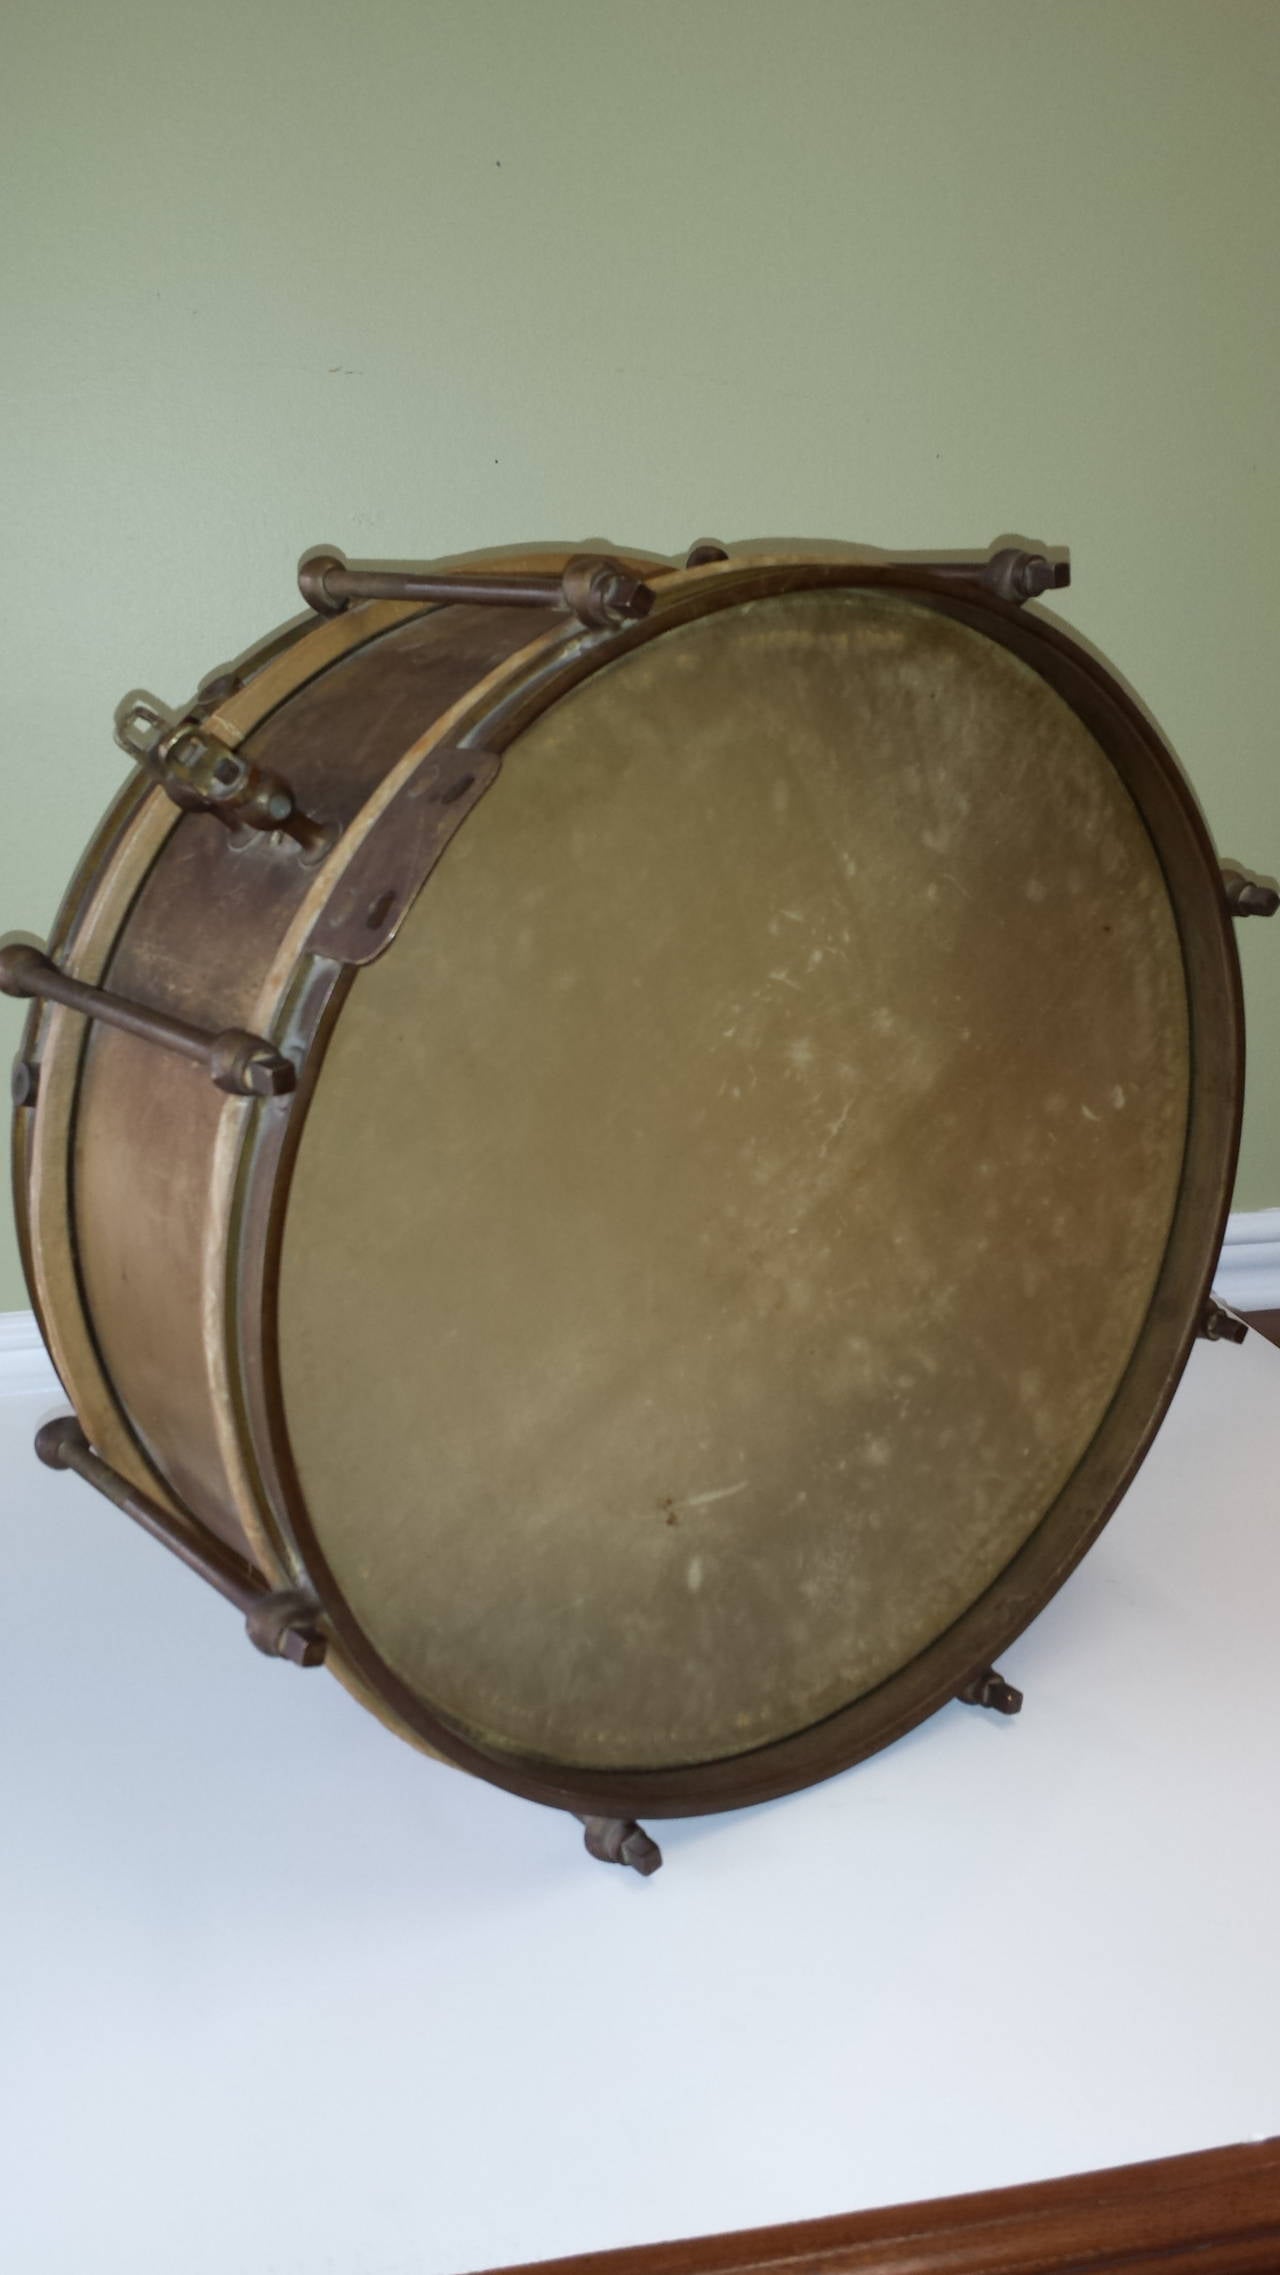 All Brass Military or Marching Band Snare Drum, circa 1900, The drum is unmarked unless on the inside and has no other numbers or marks, Origin and affiliation unknown, It does have a neck or shoulder strap mount, it seems to vintage skins and